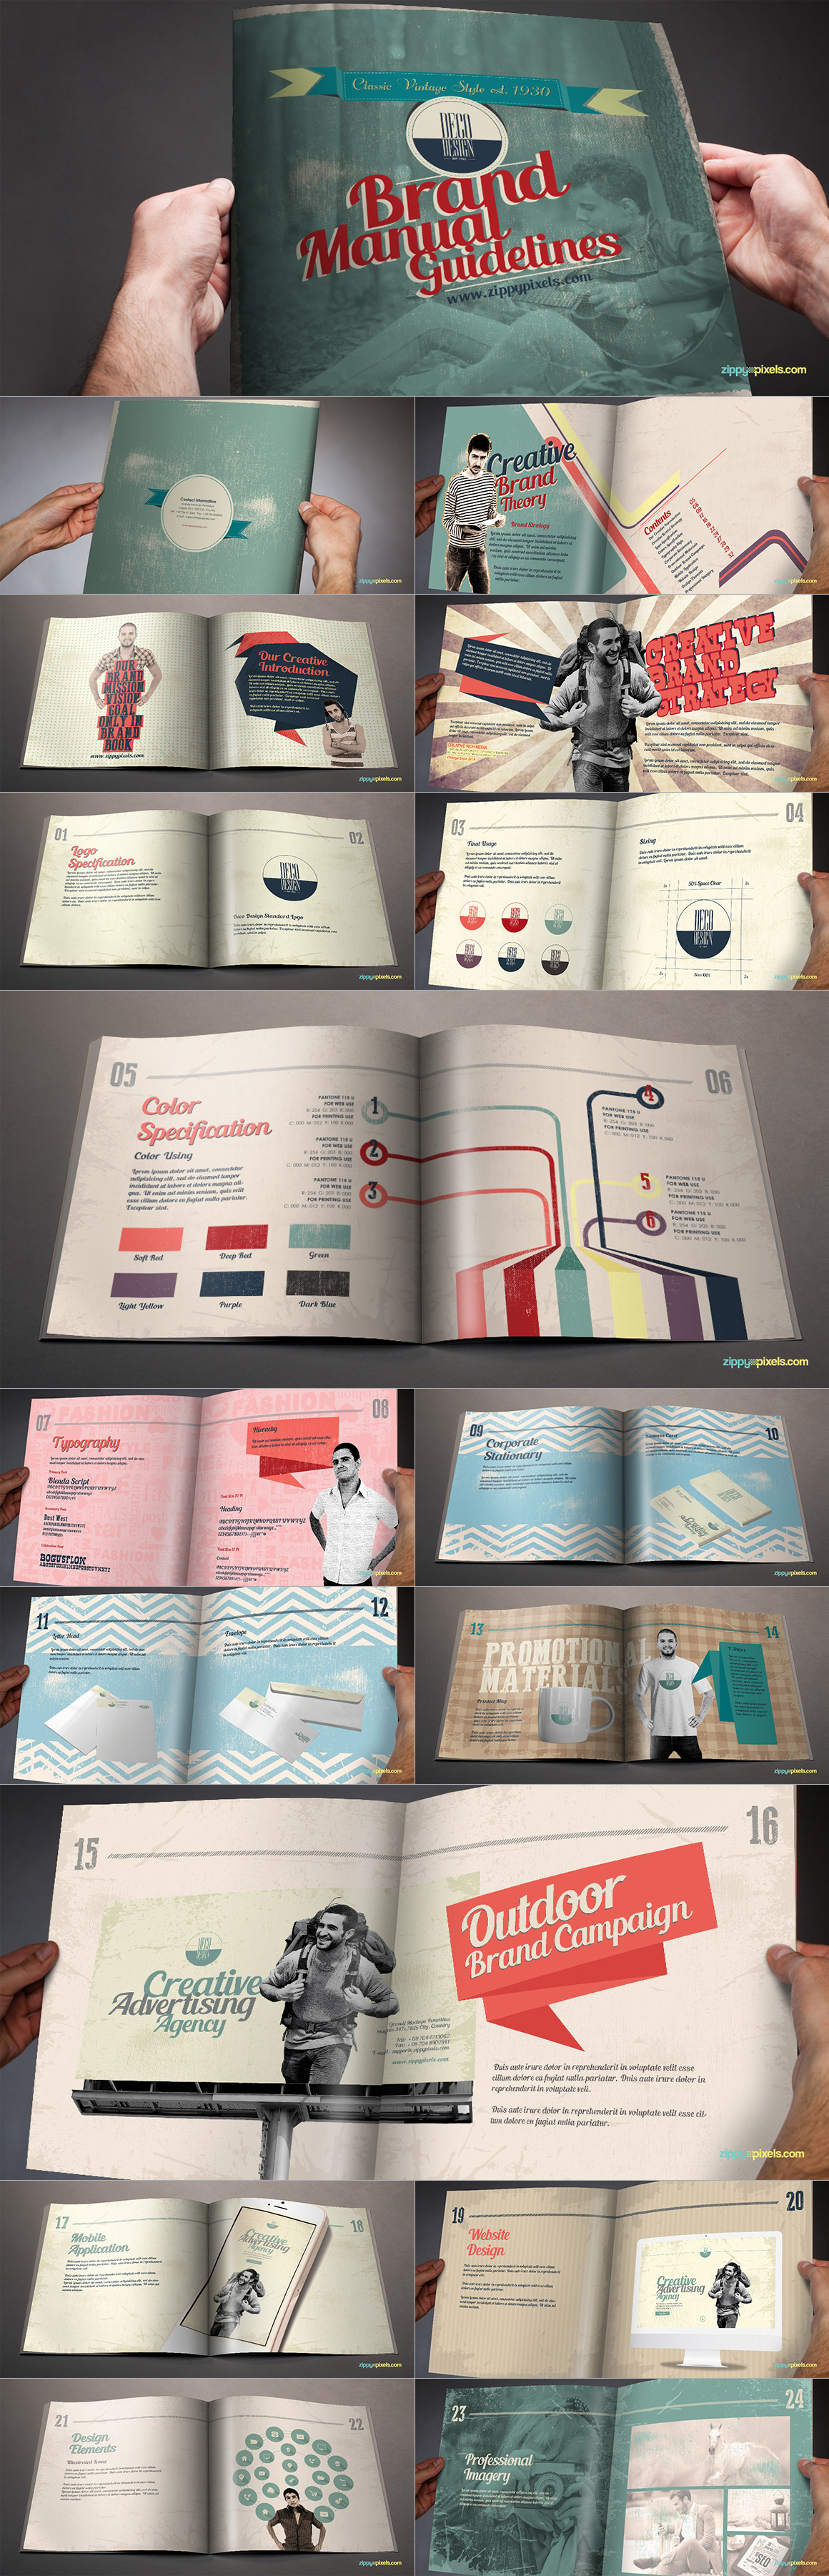 Style Guide & Brand Book Templates-strip13